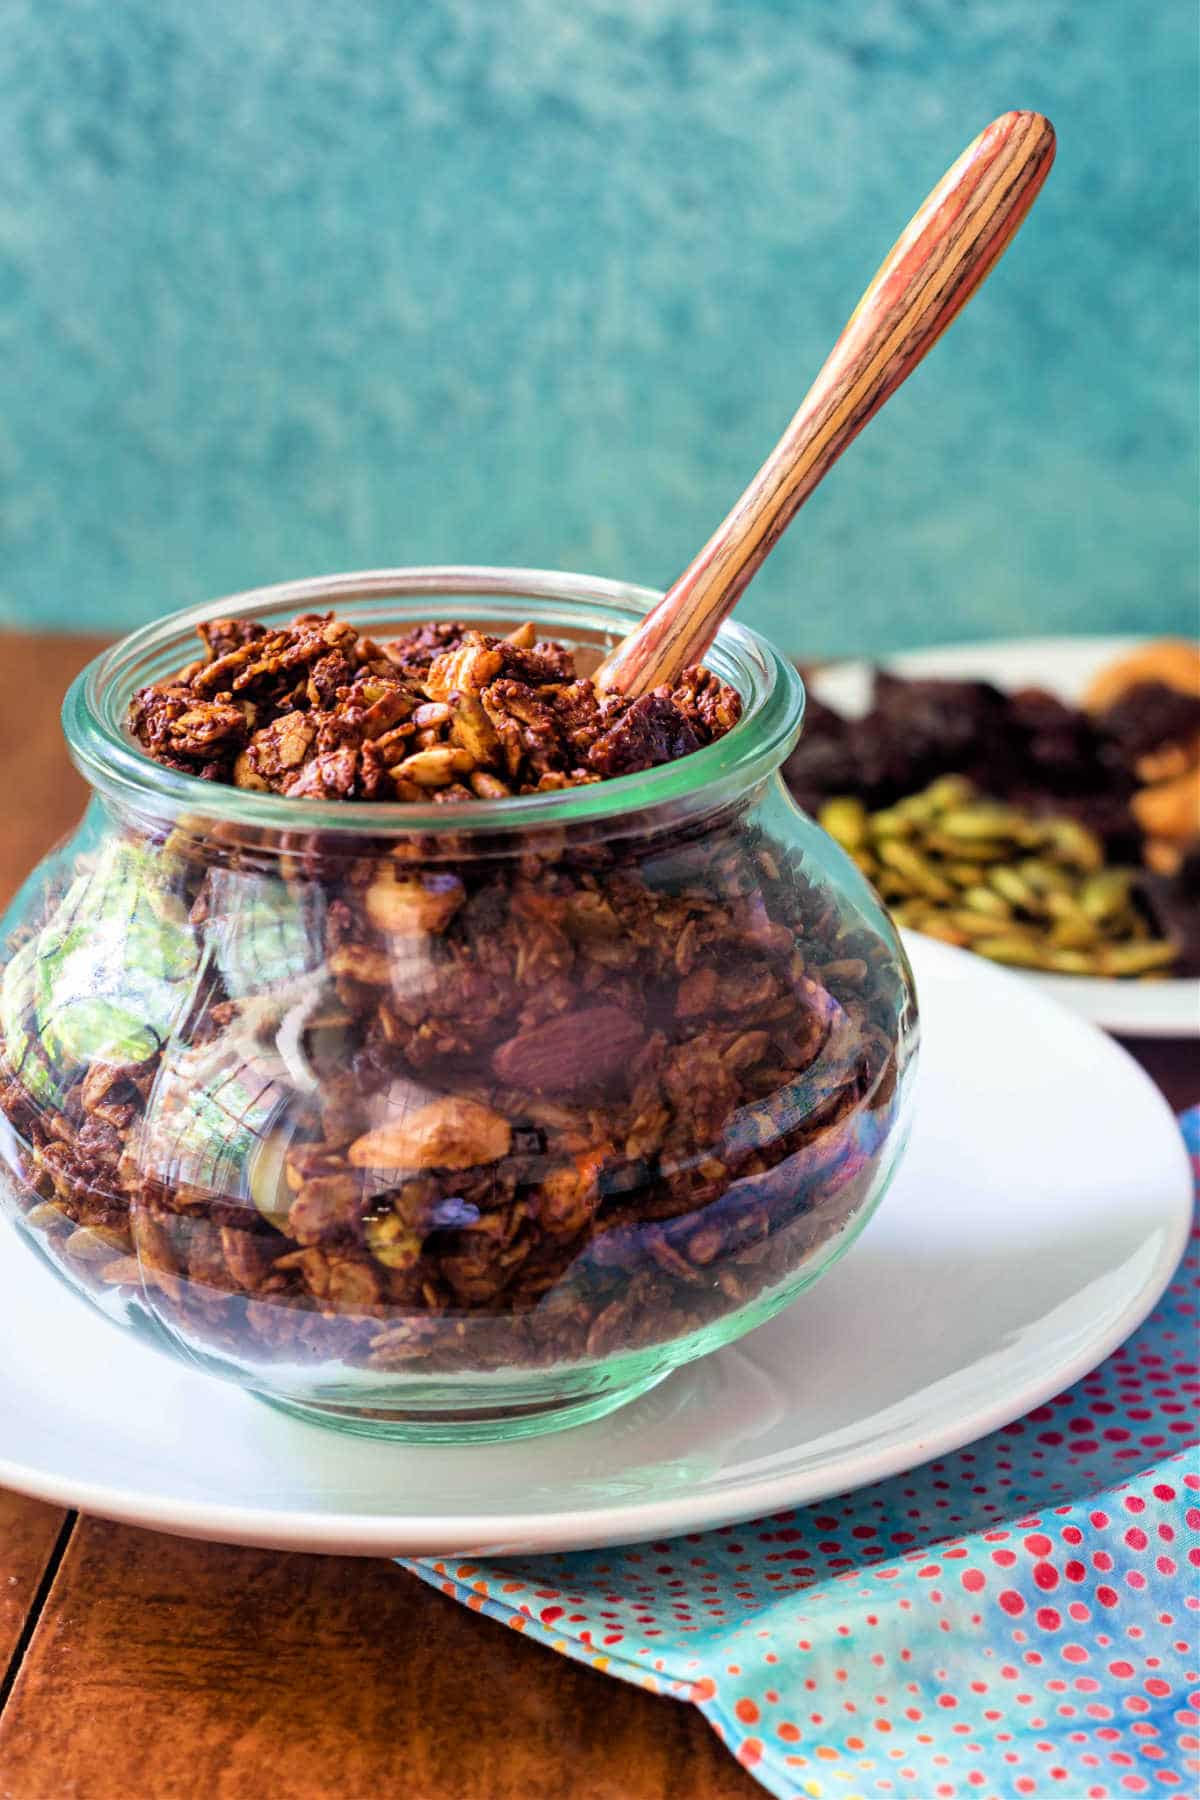 A jar of chocolate granola iwth a wooden spoon in it.